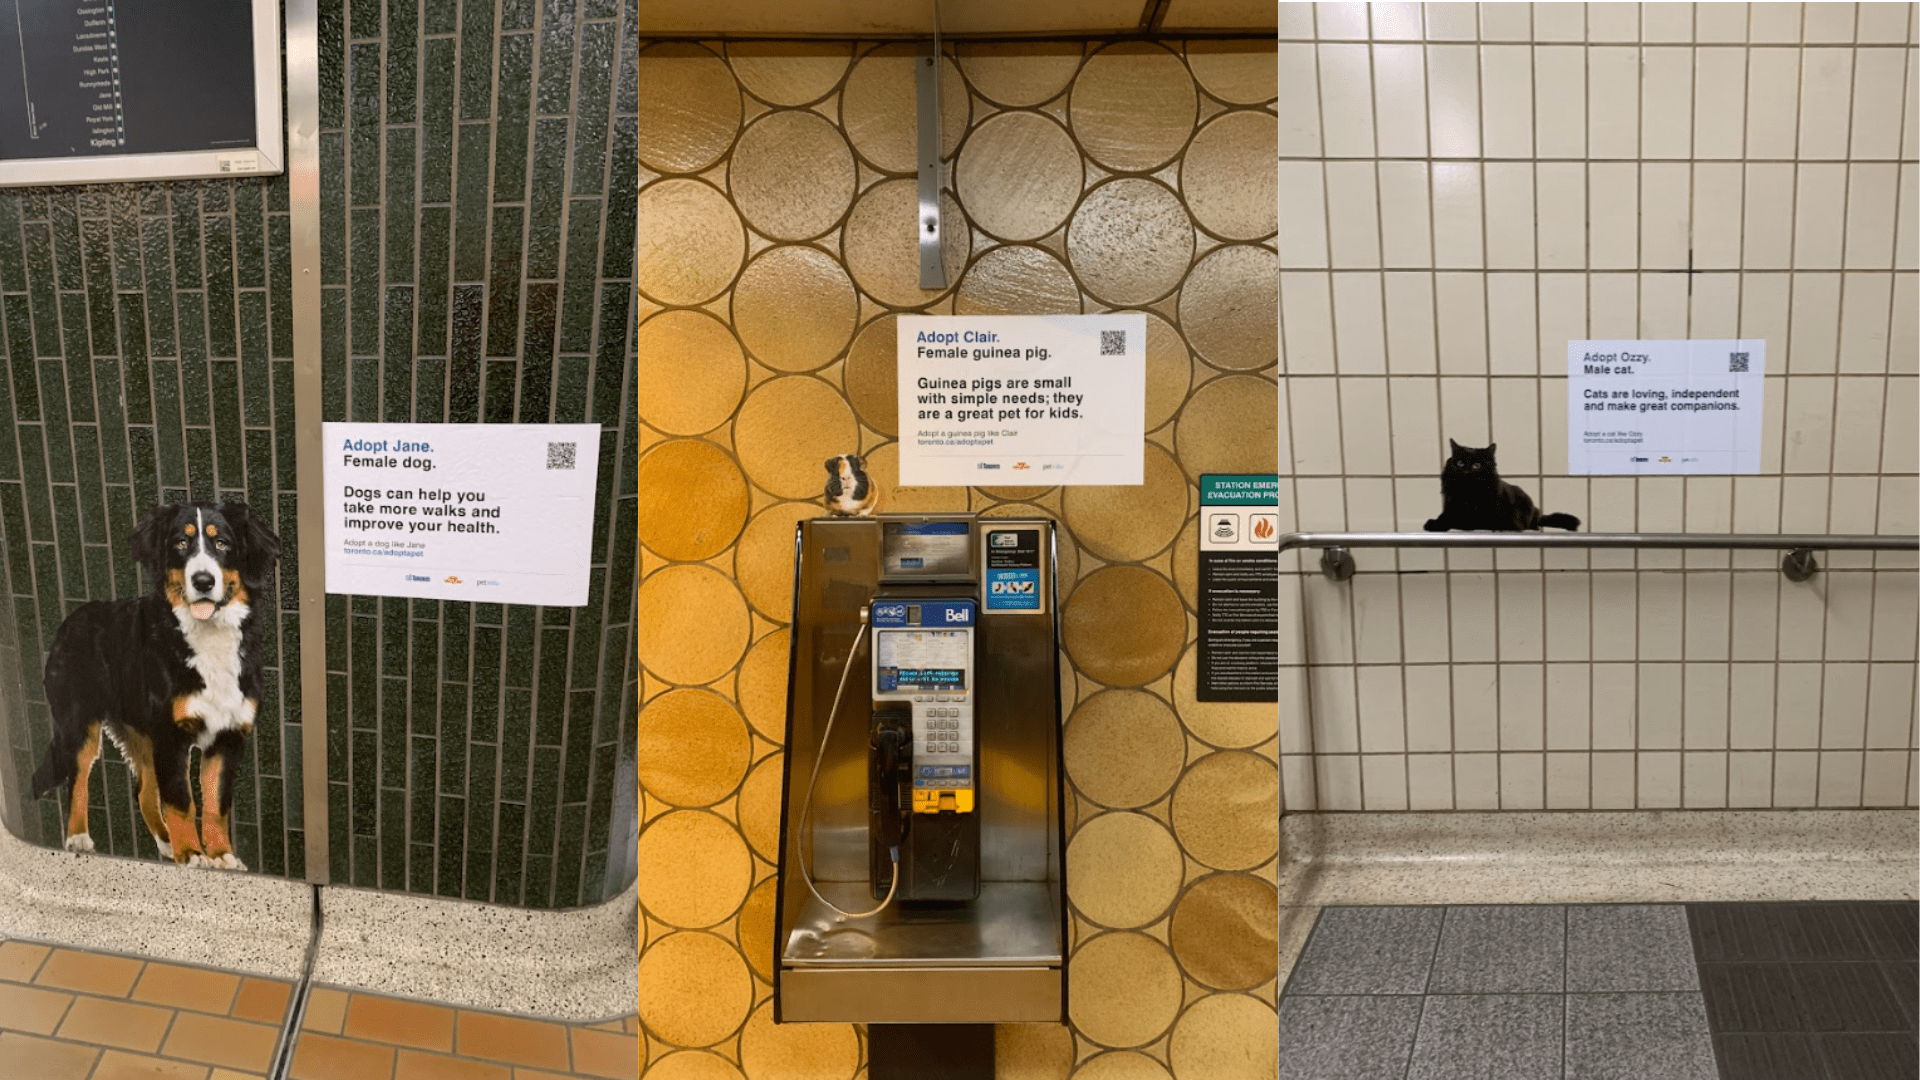 Images of a dog, cat, and guinea pig in the Toronto subway with messaging about benefits of having a pet